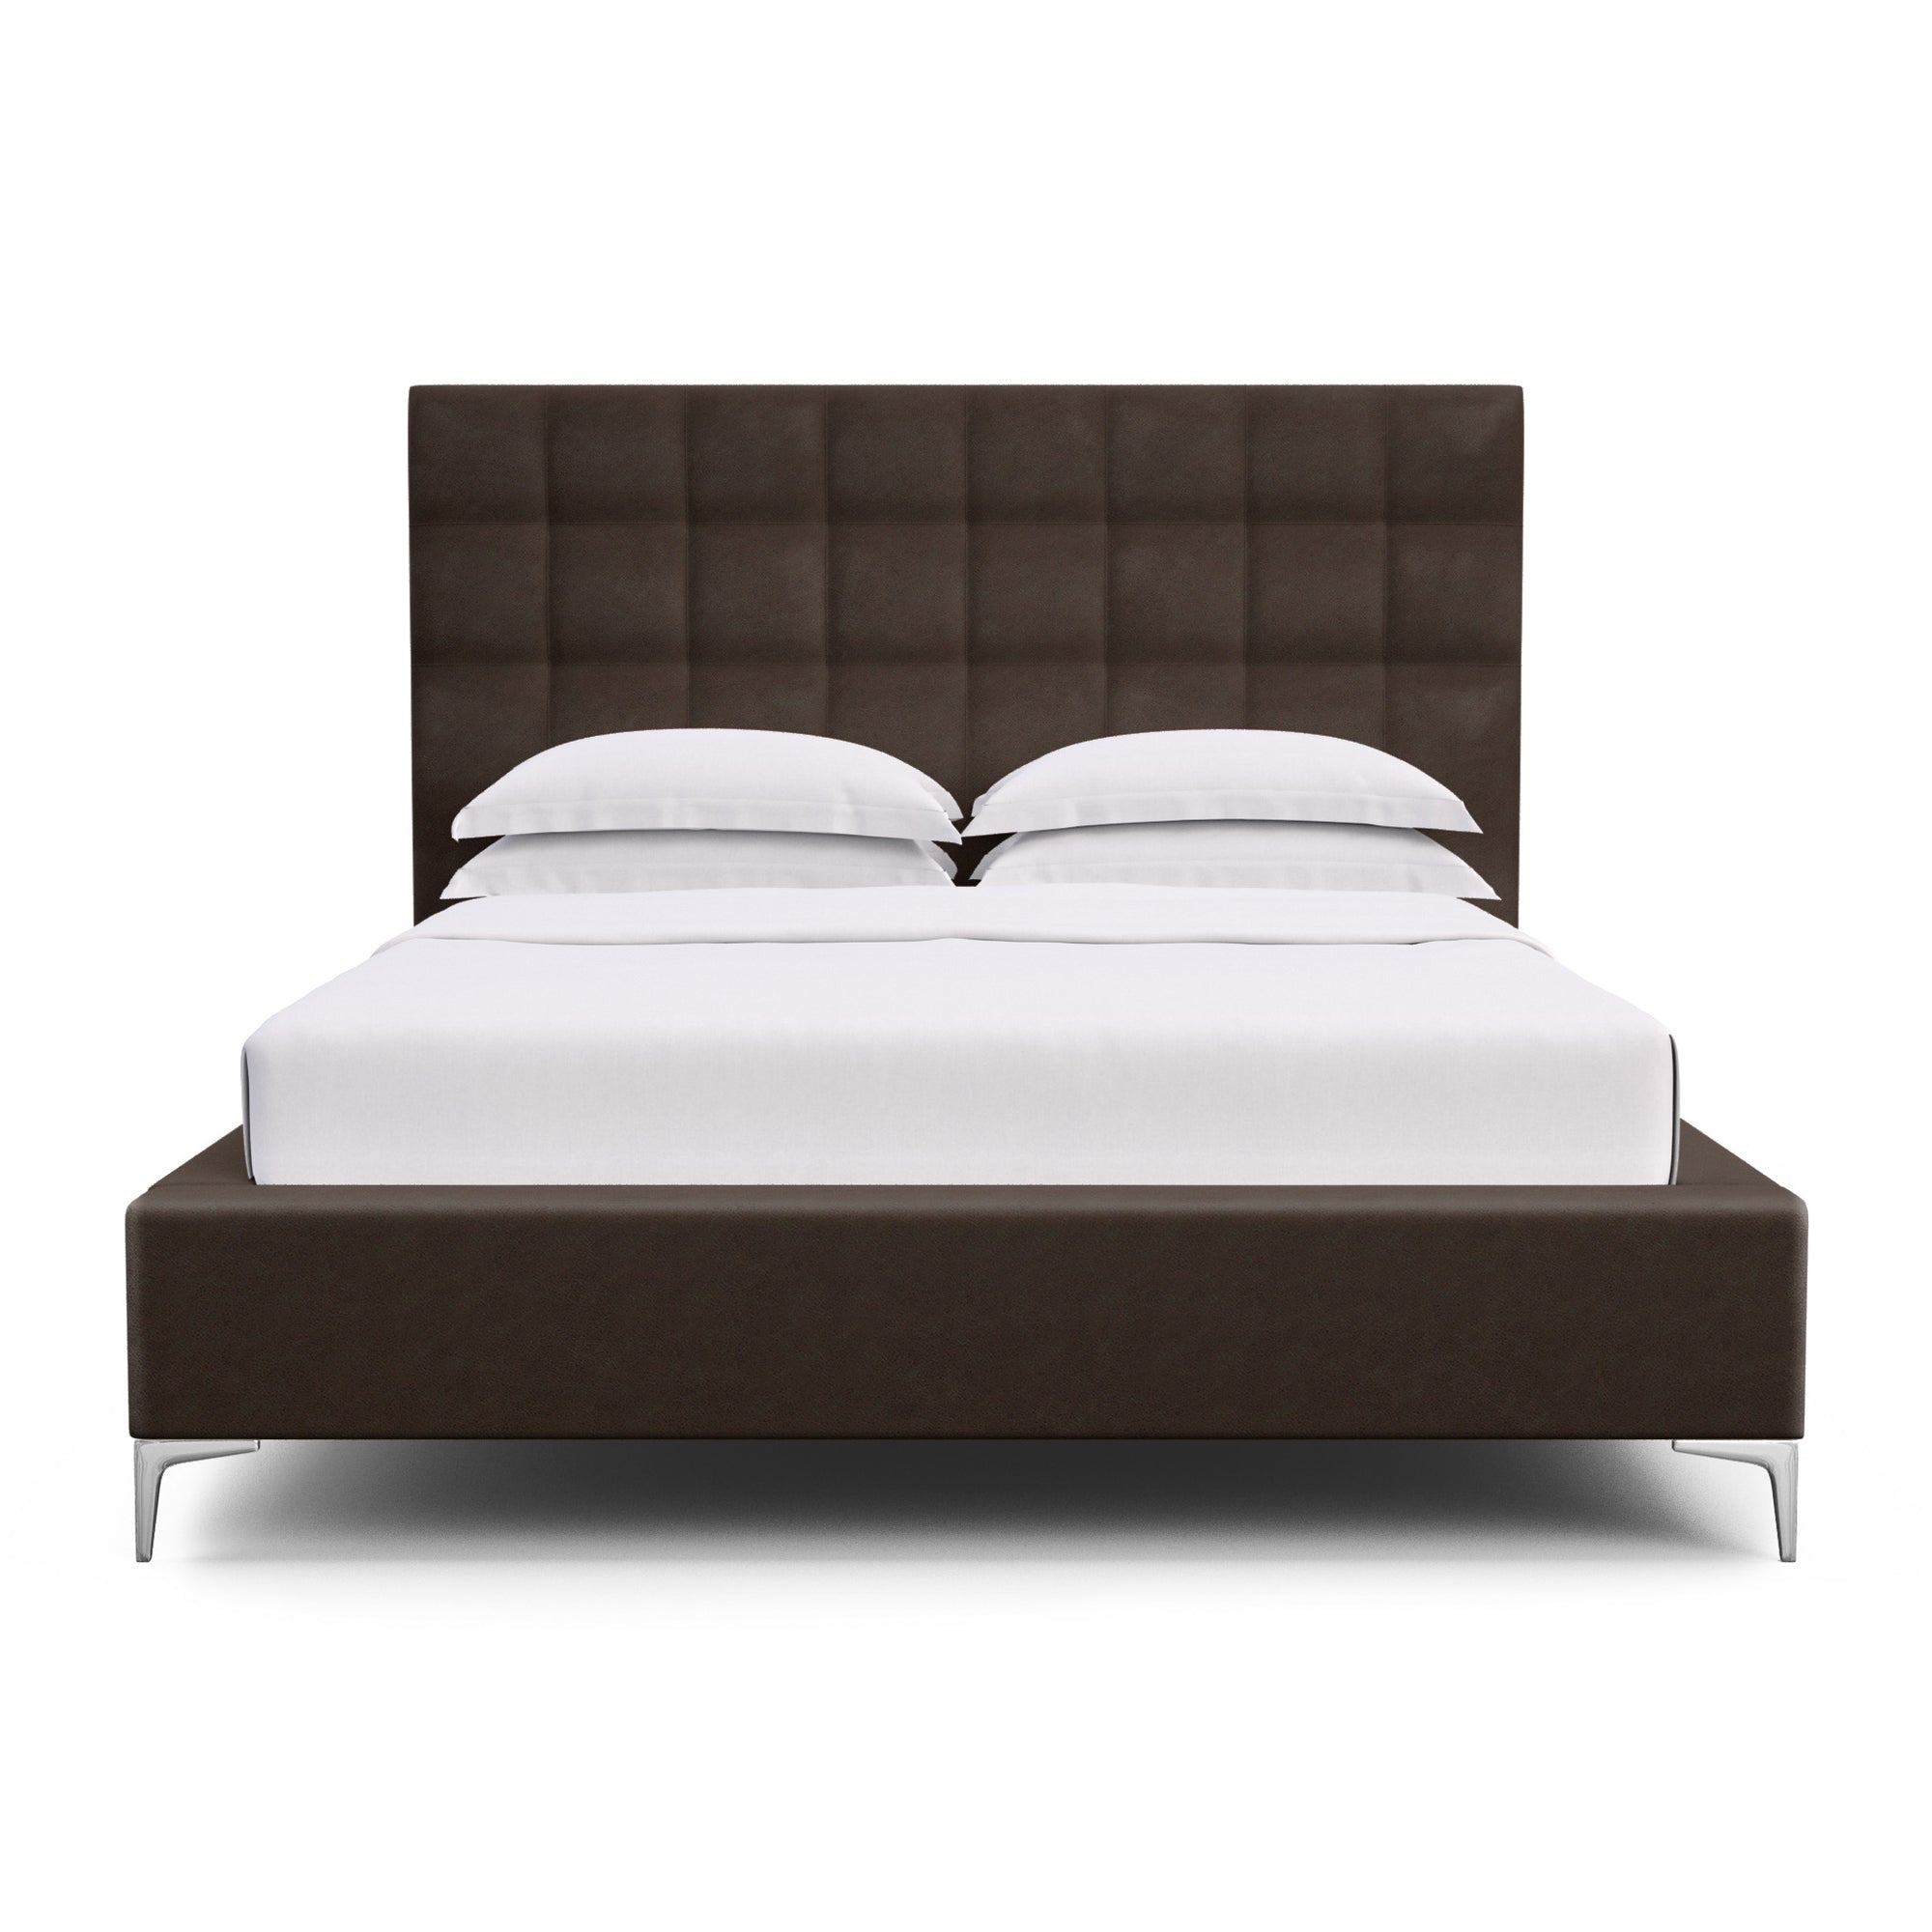 Bryant Tufted Panel Bed - Chocolate Vintage Leather